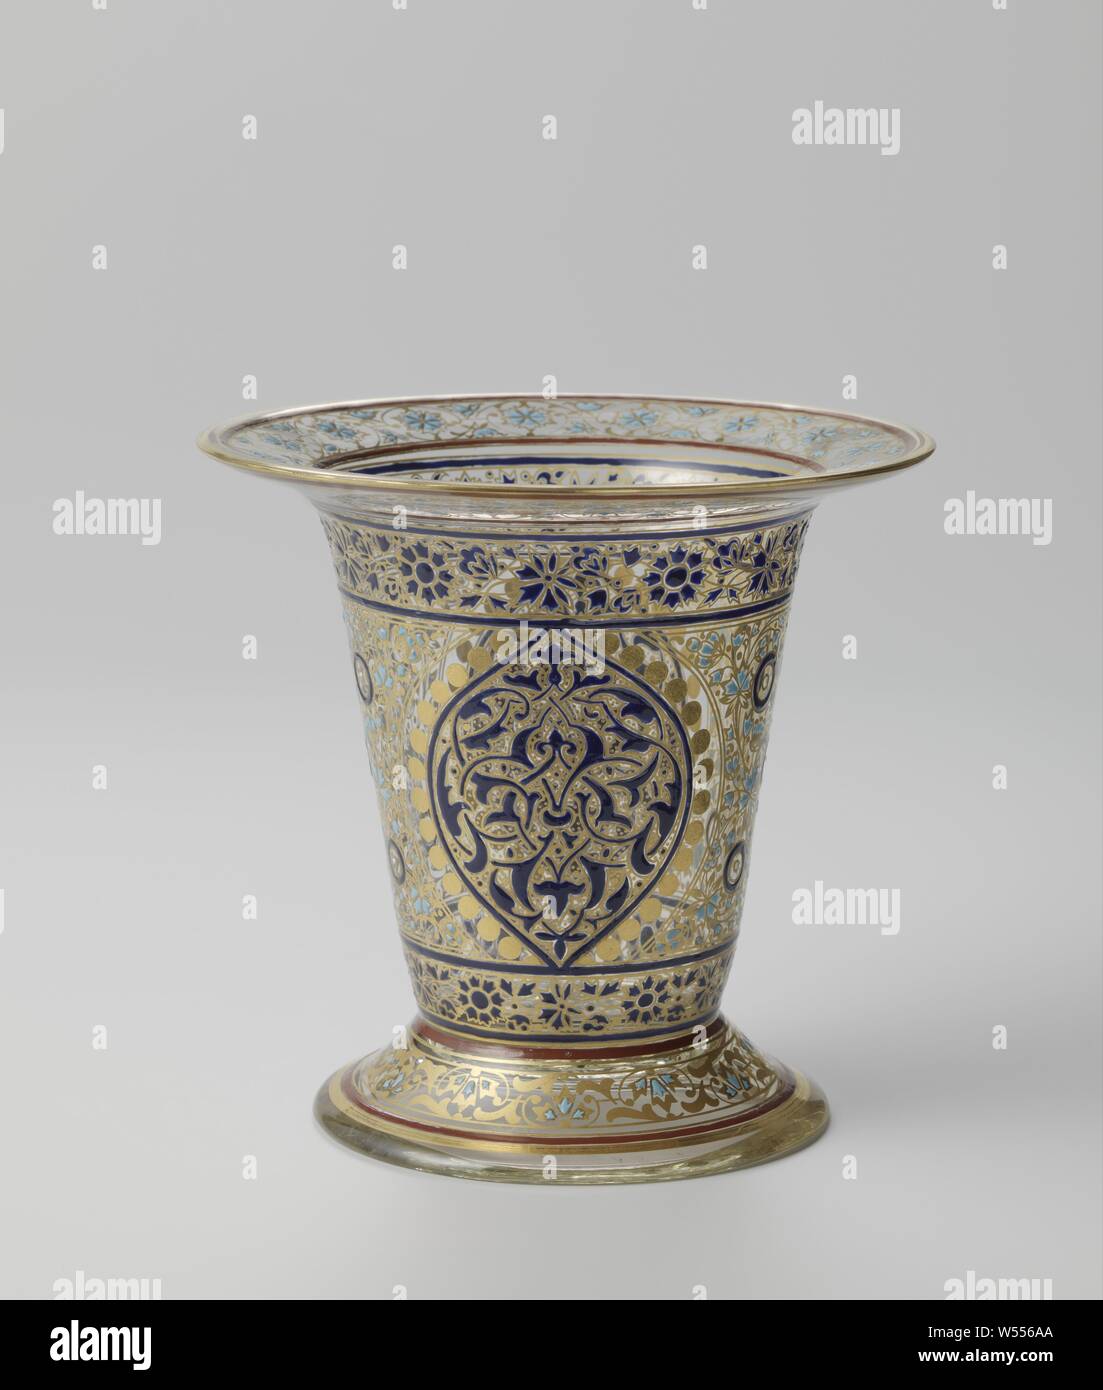 Vase Vase with orienting motifs, Vase with curved foot edge, conical foot, funnel-shaped body, flat and protruding edge. Decoration in white, brown, dark and light blue and gilt in orienting motifs. Marked on the bottom in white enamel with the monogram JLW (Joseph and Ludwig Wien), ornaments, art, J. en L. Lobmeyr, Bohemen, c. 1870 - c. 1880, glass, gilding, h 13.4 cm × d 14.5 cm d 10.3 cm Stock Photo